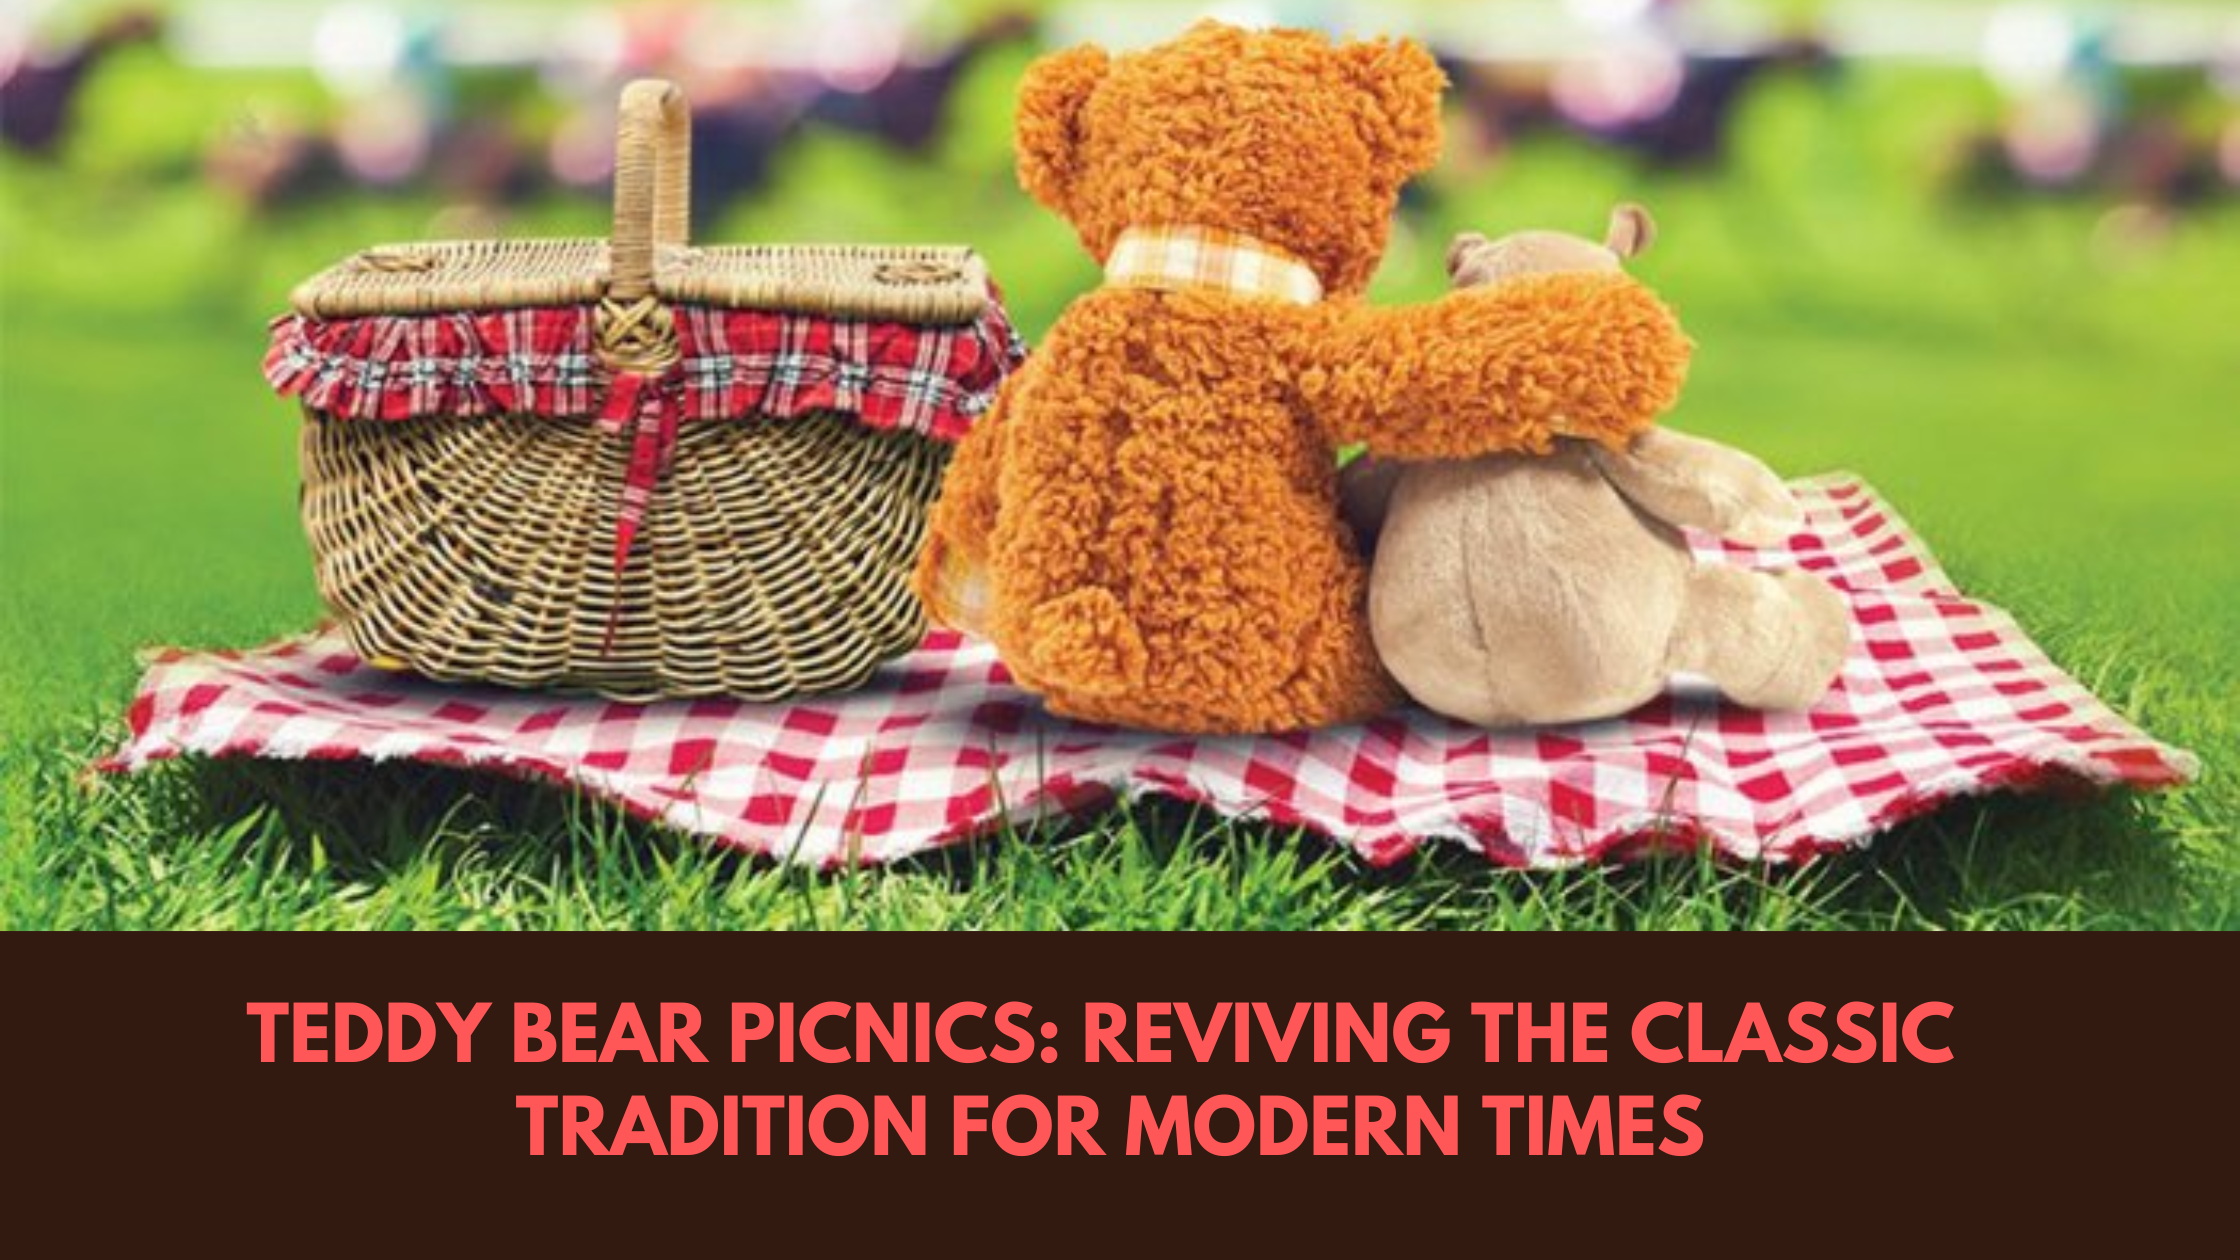 Teddy Bear Picnics: Reviving the Classic Tradition for Modern Times